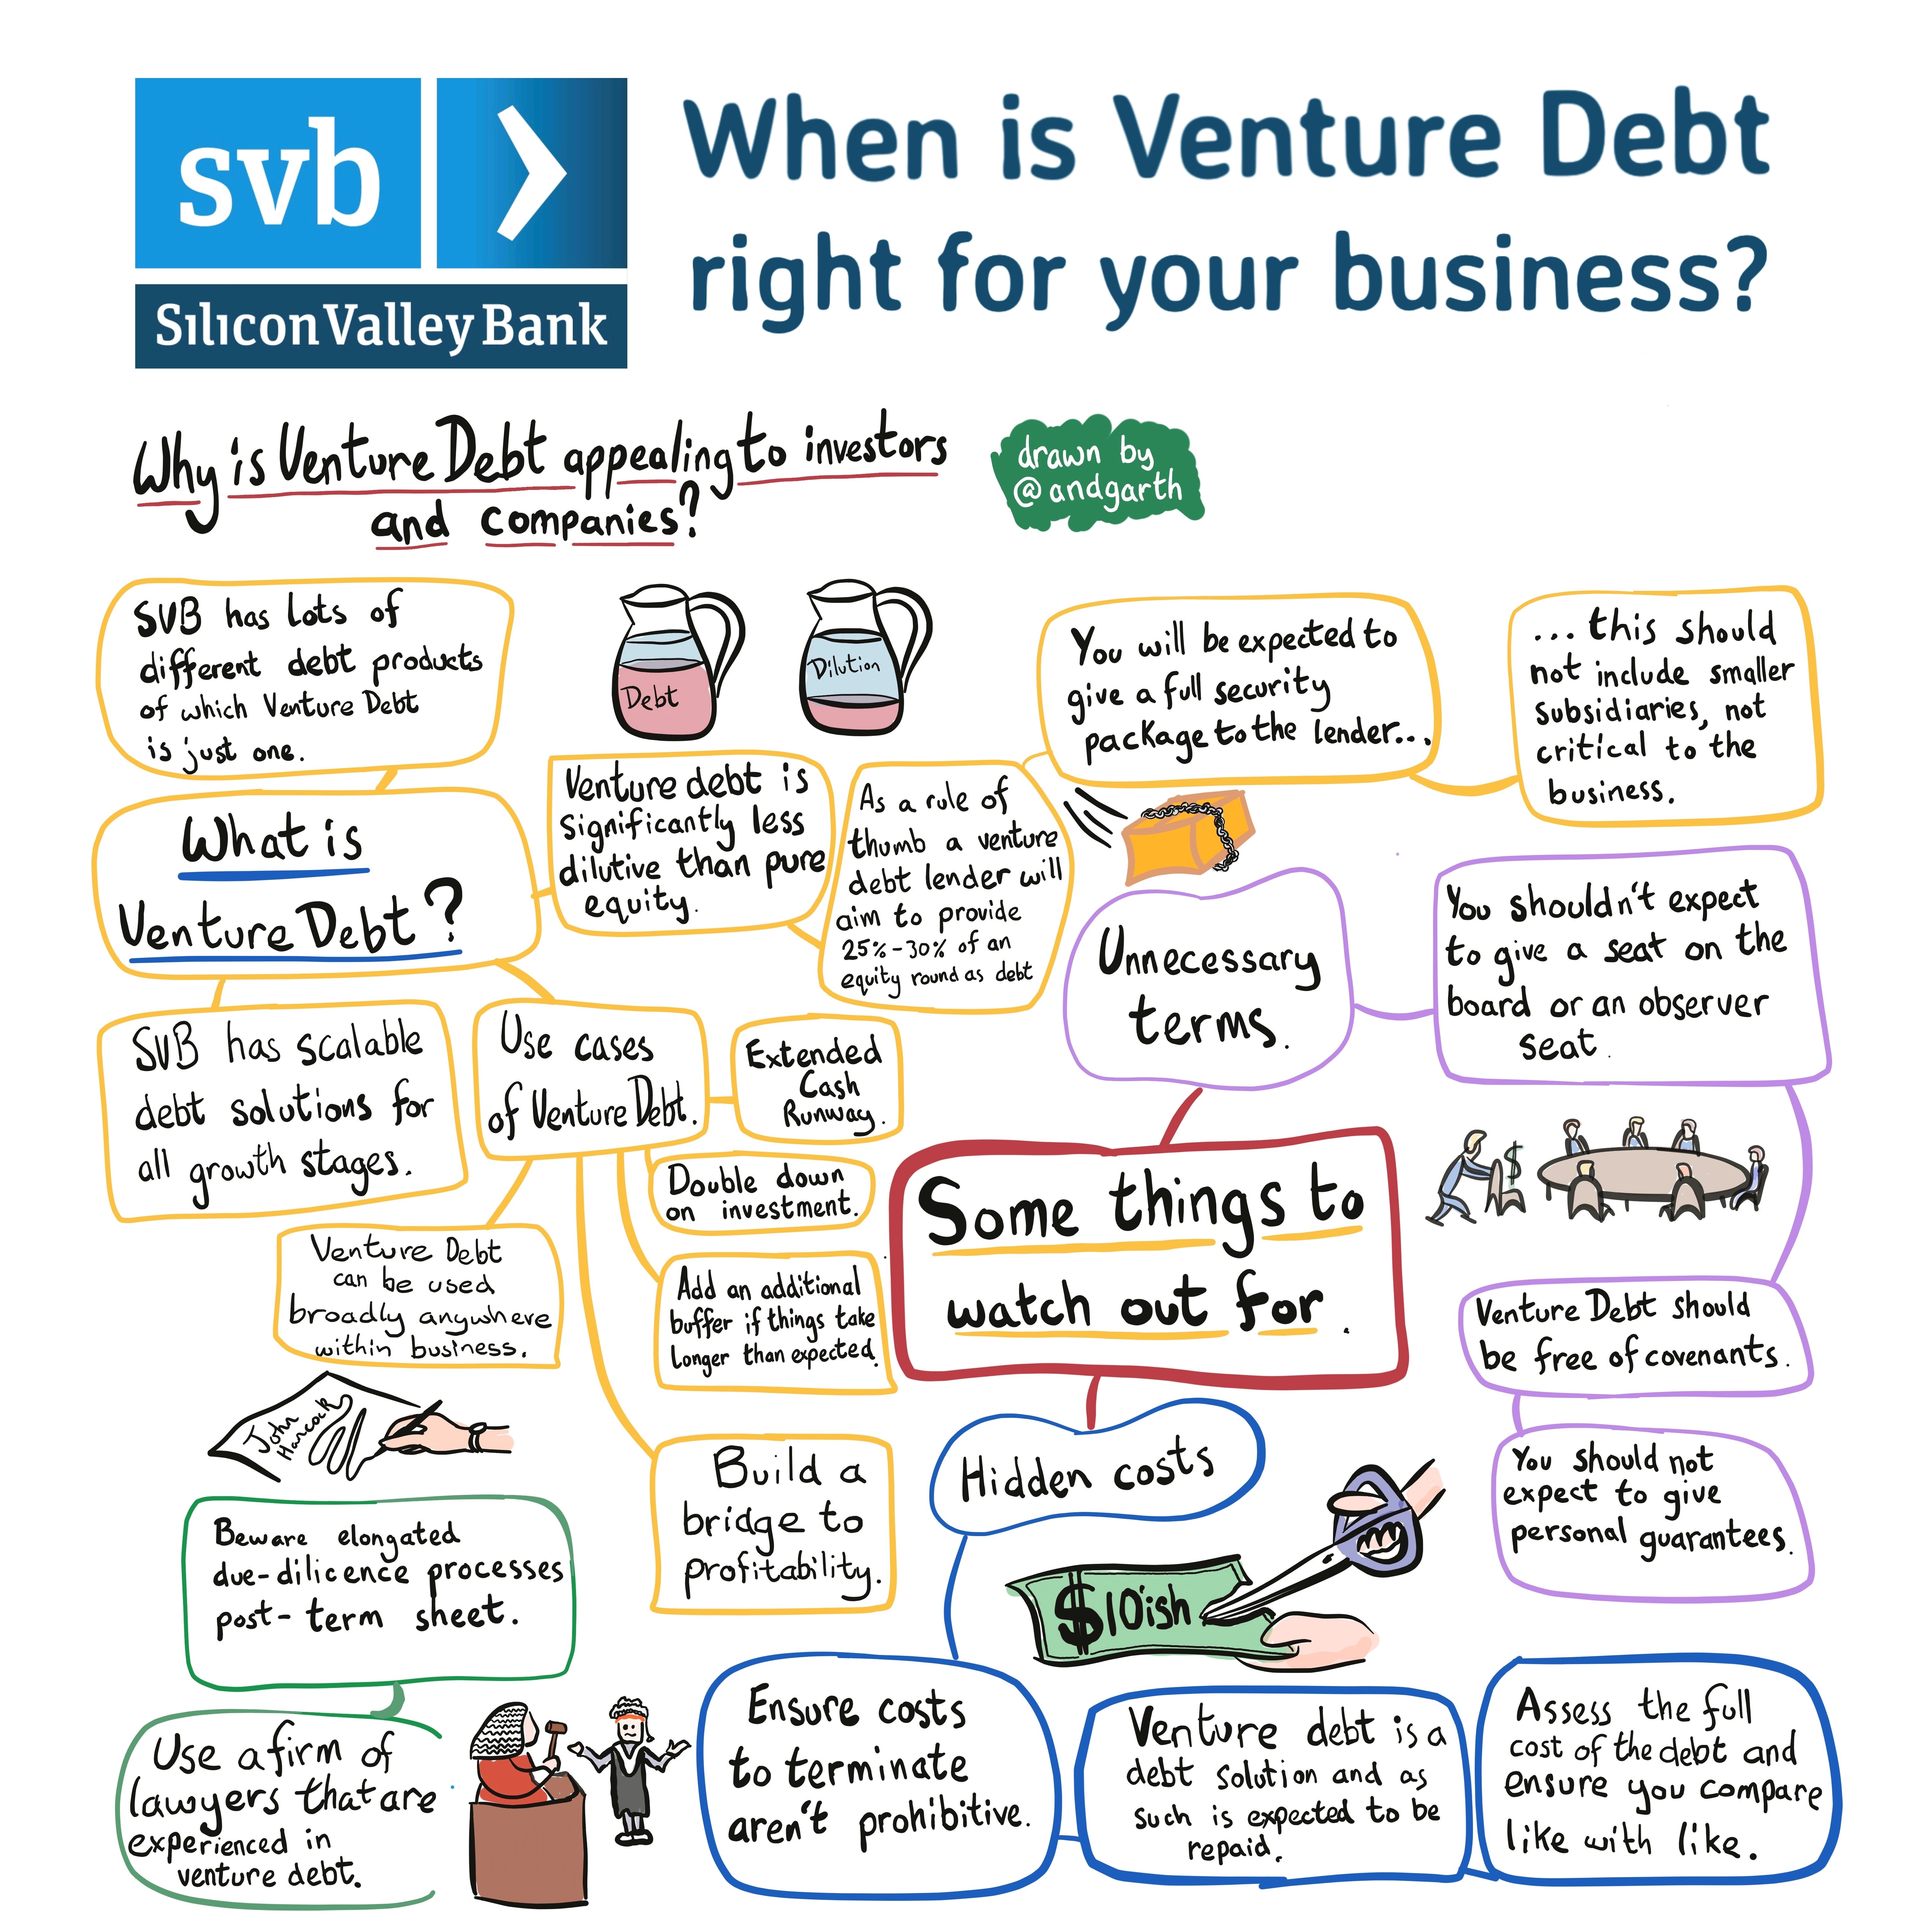 How to leverage venture debt for growth?